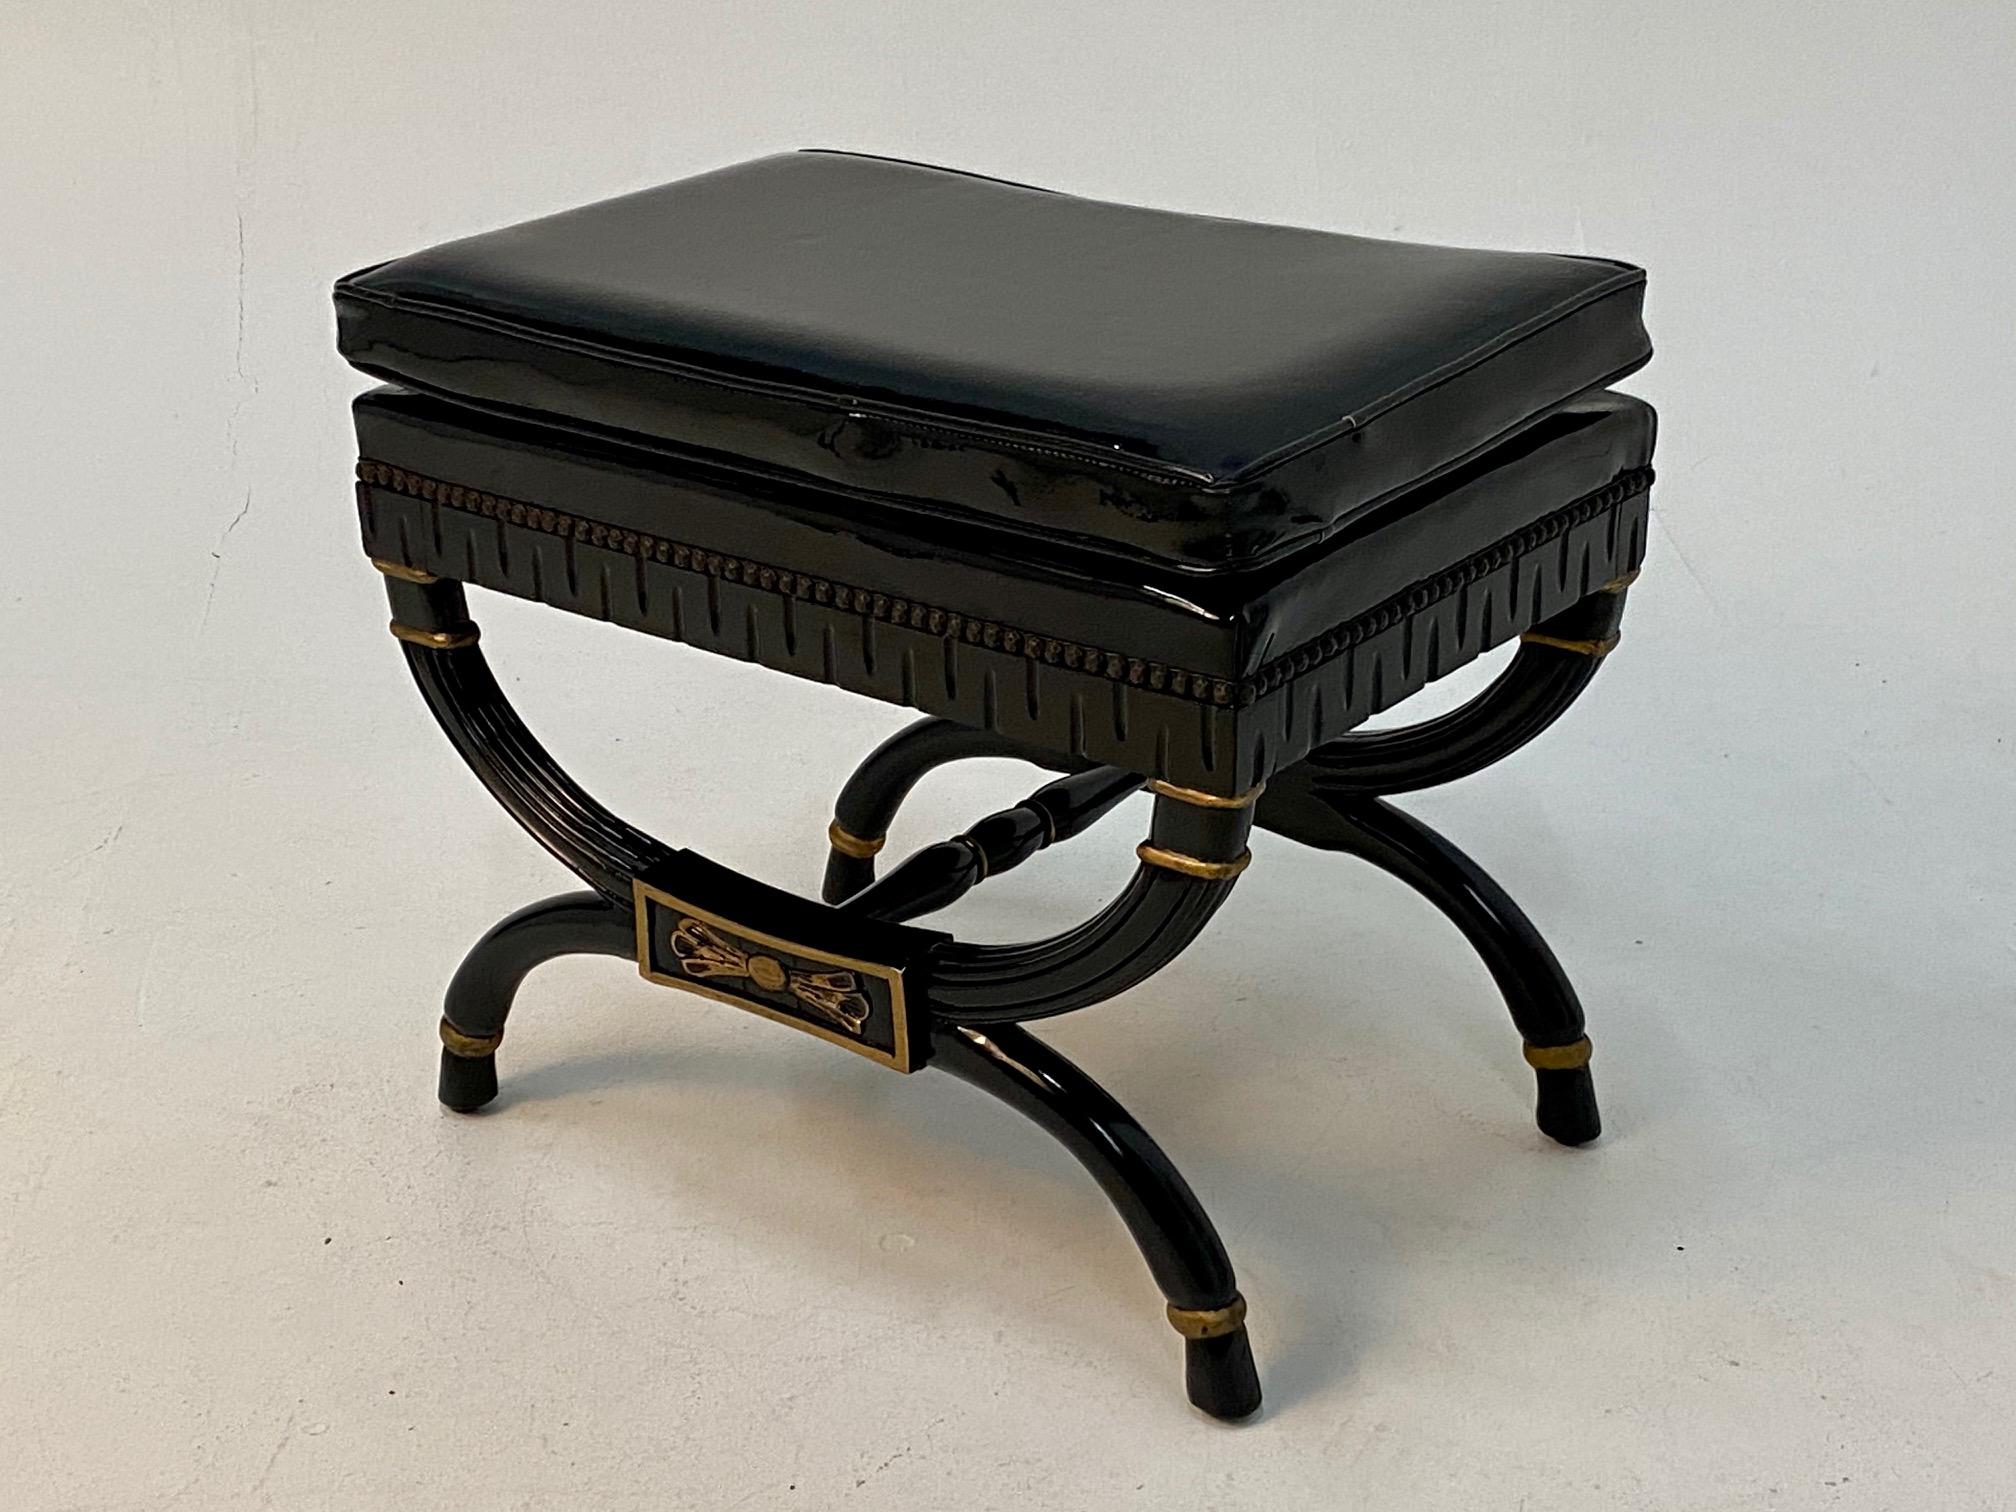 Schnazzy rectangular Regency style ebonized & giltwood ottoman bench with original black patent leather upholstery.